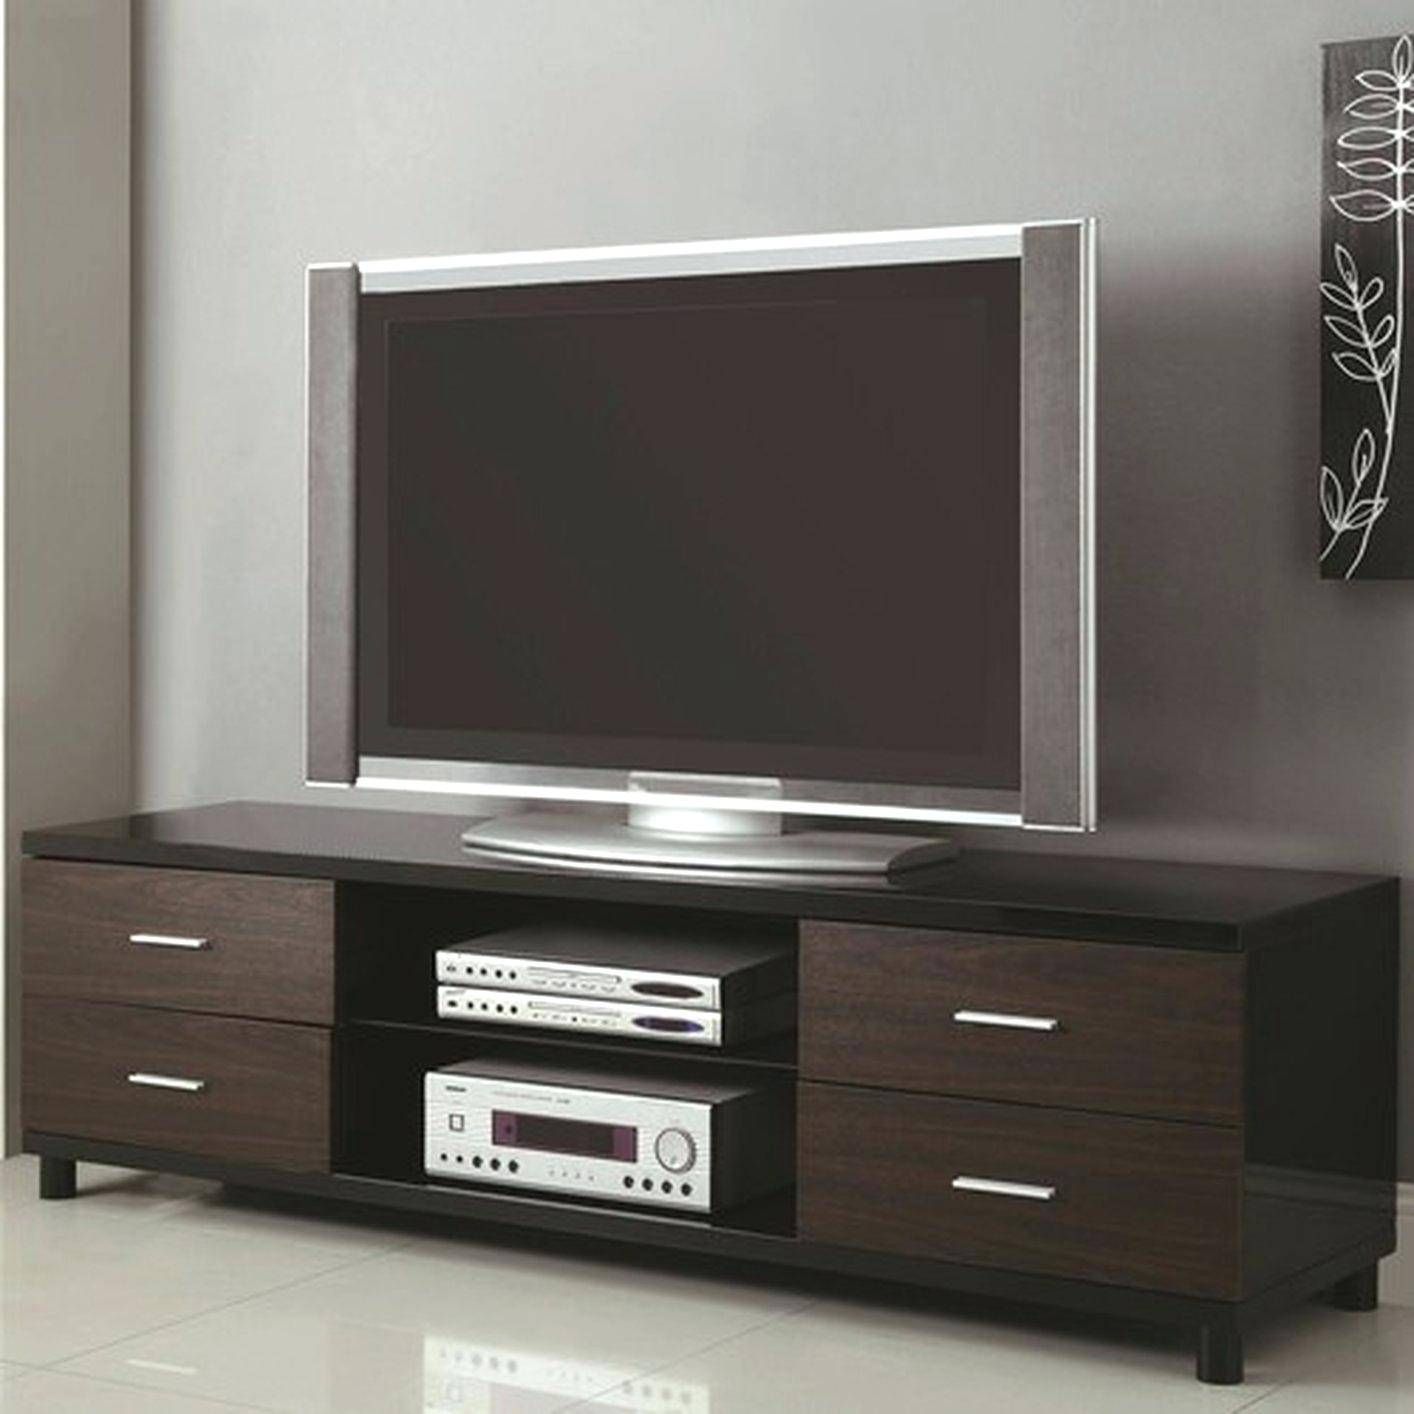 Tv Stand : Tv Stands Tv Stand Oak Oak Tv Stands For Flat Screen Pertaining To Light Cherry Tv Stands (View 7 of 15)